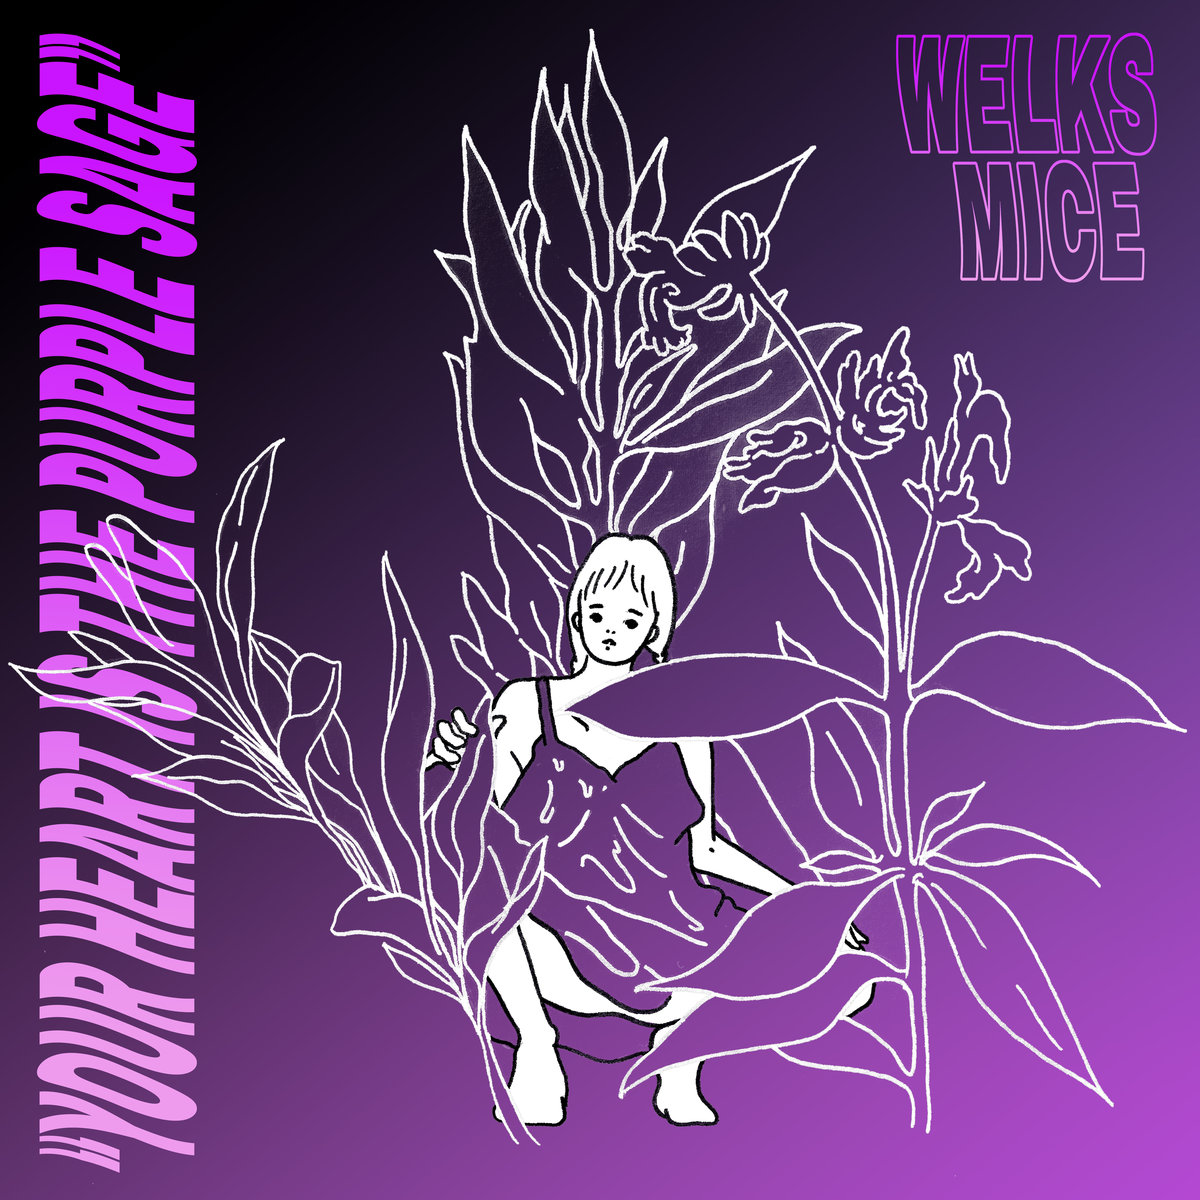 Welks Mice Release New Single “Your Heart is the Purple Sage”